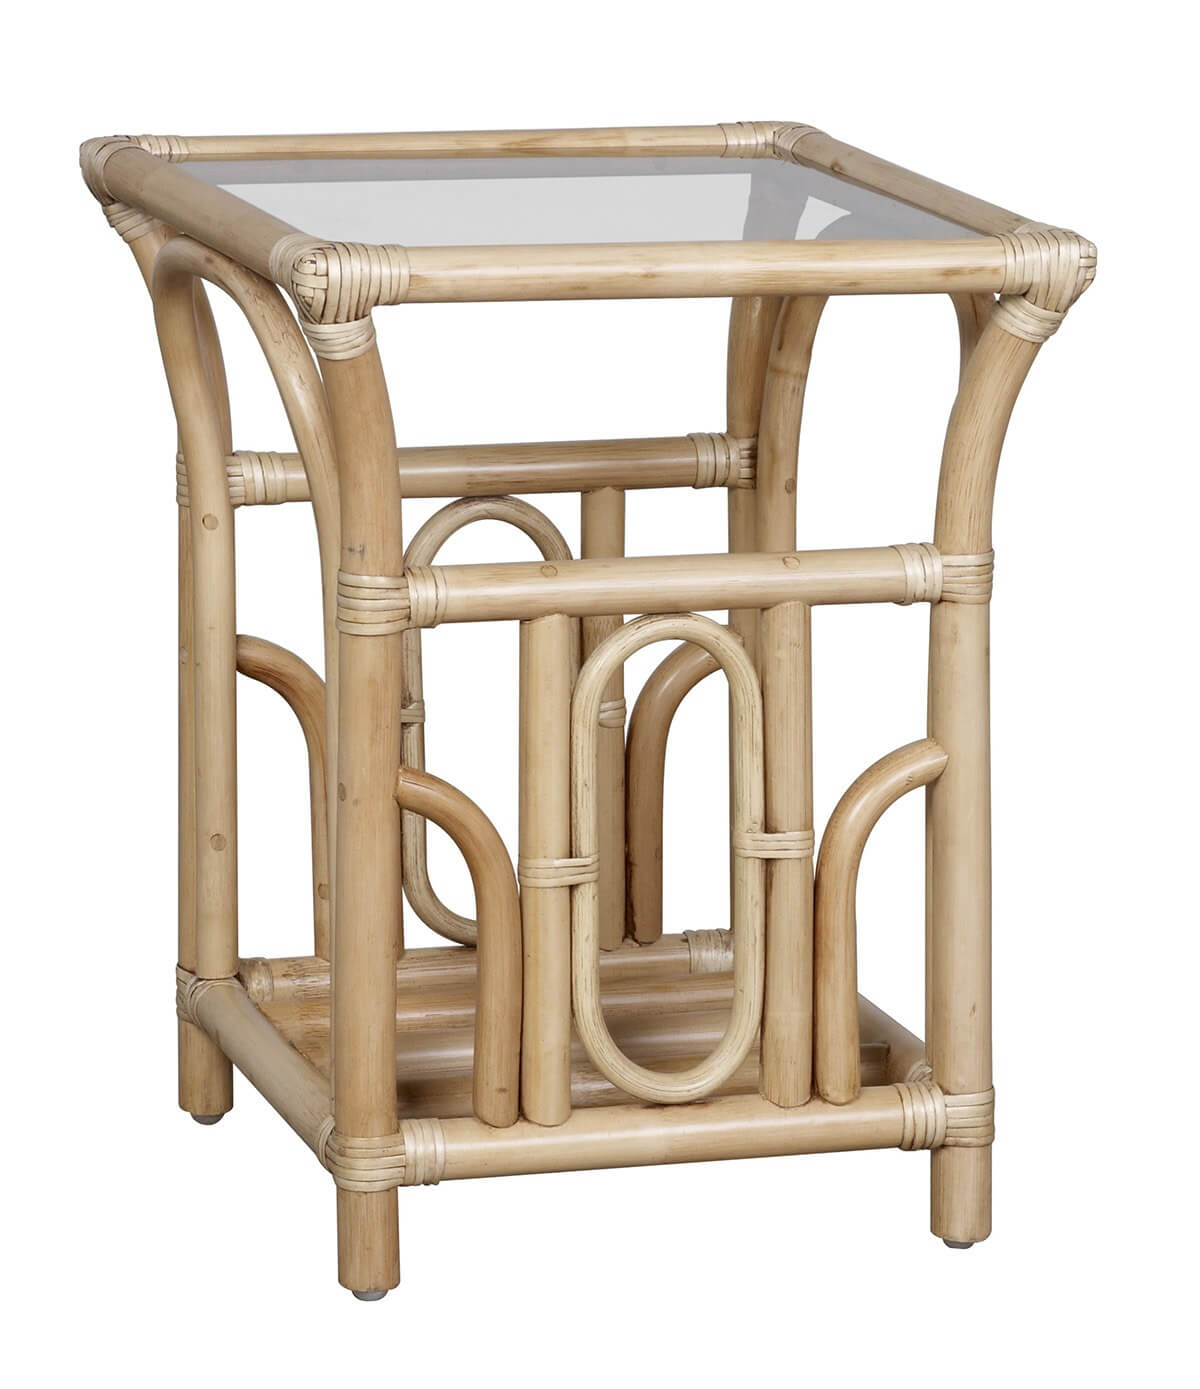 Showing image for Baltimore side table